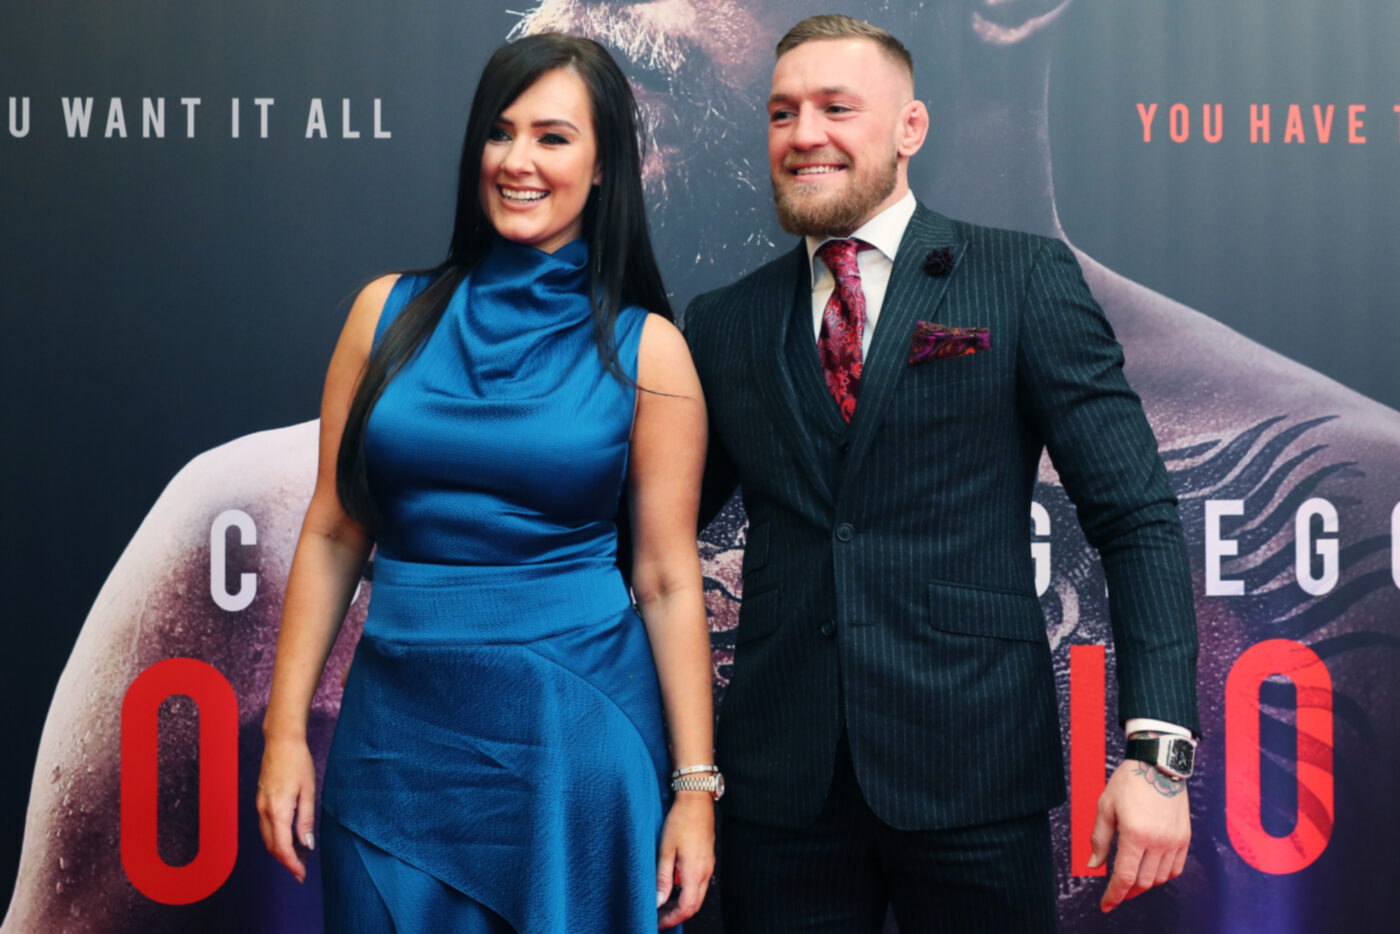 Conor Mcgregor’s Wife, Dee Devlin, The Woman Behind The Champion